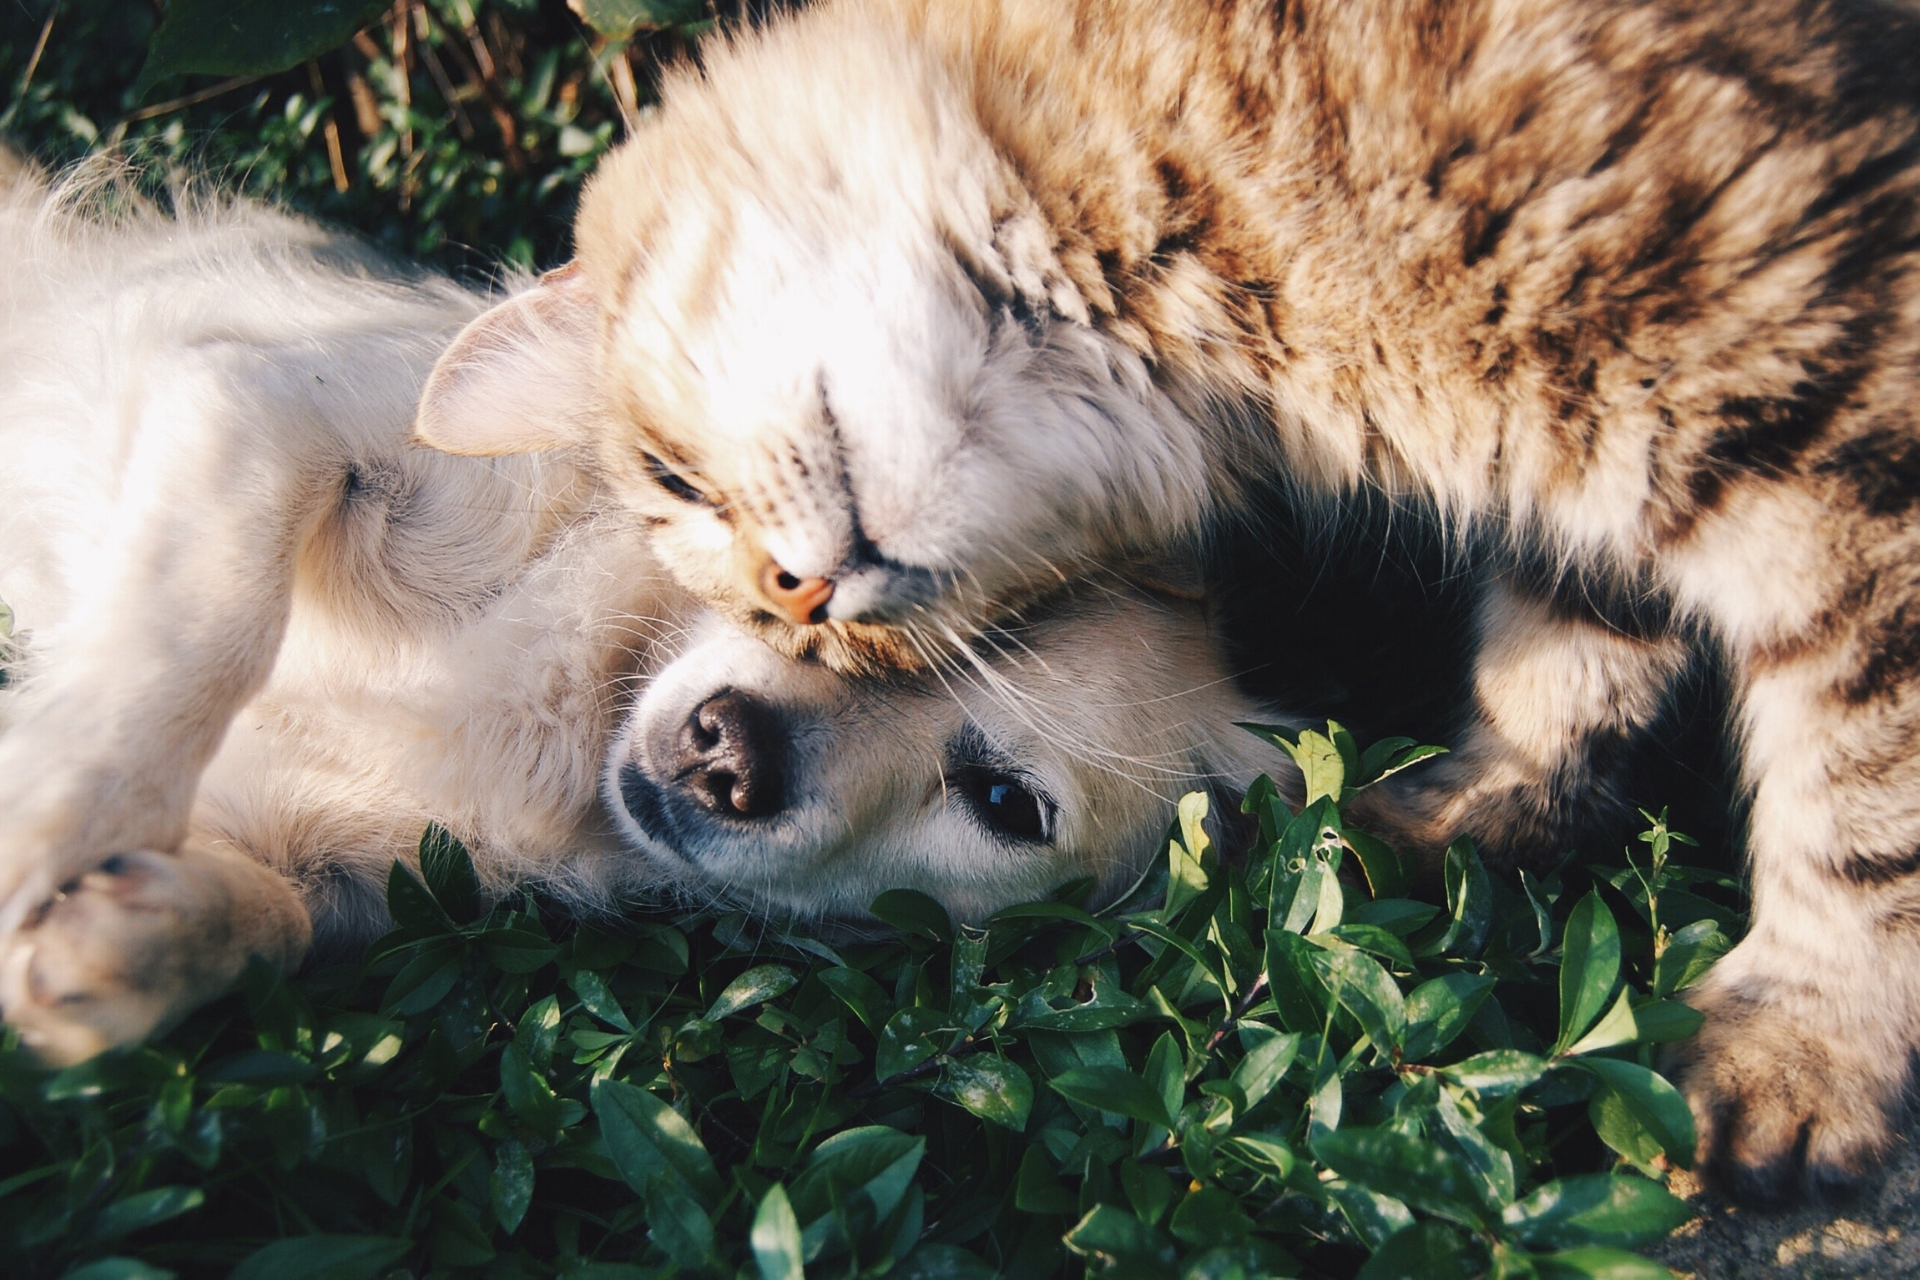 A tabby cat snuggles its head against a fawn-colored puppy on some grass. 